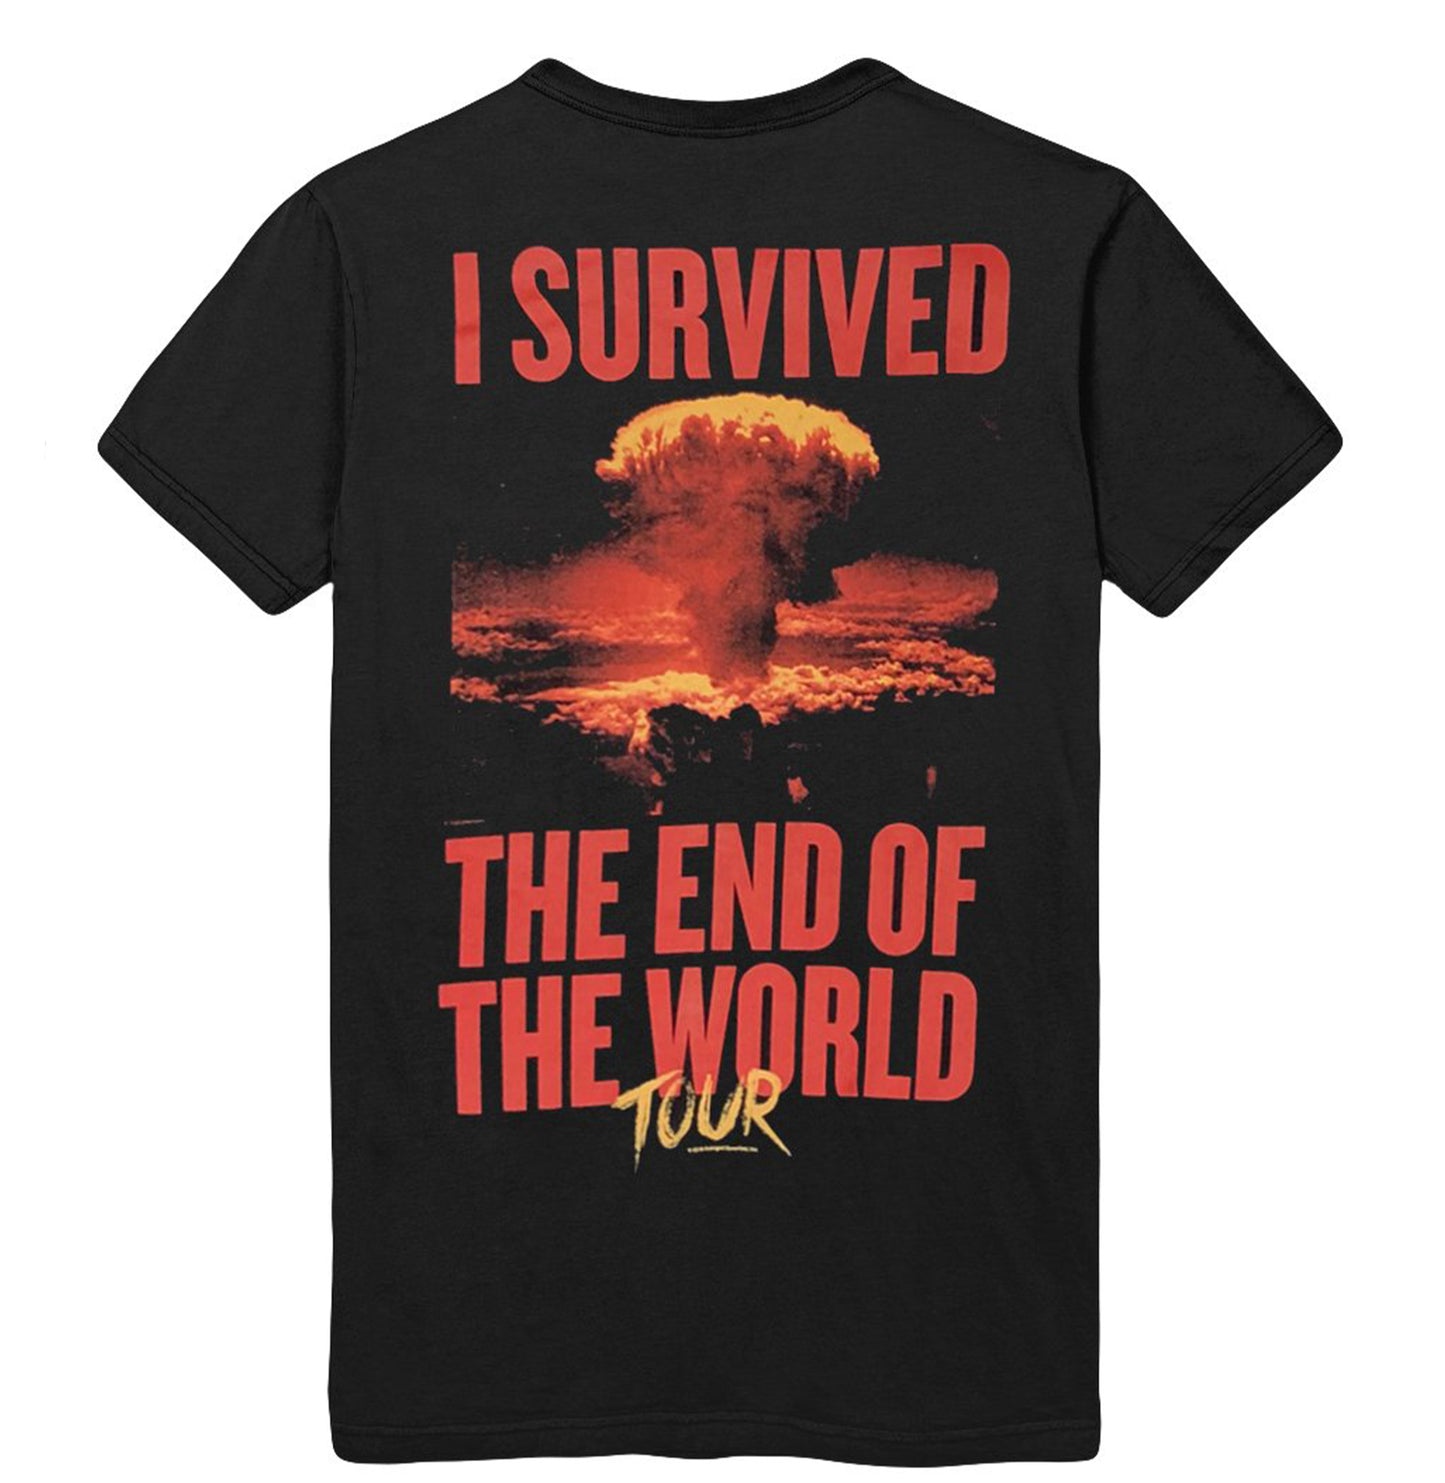 Survived The End - Tour Tee